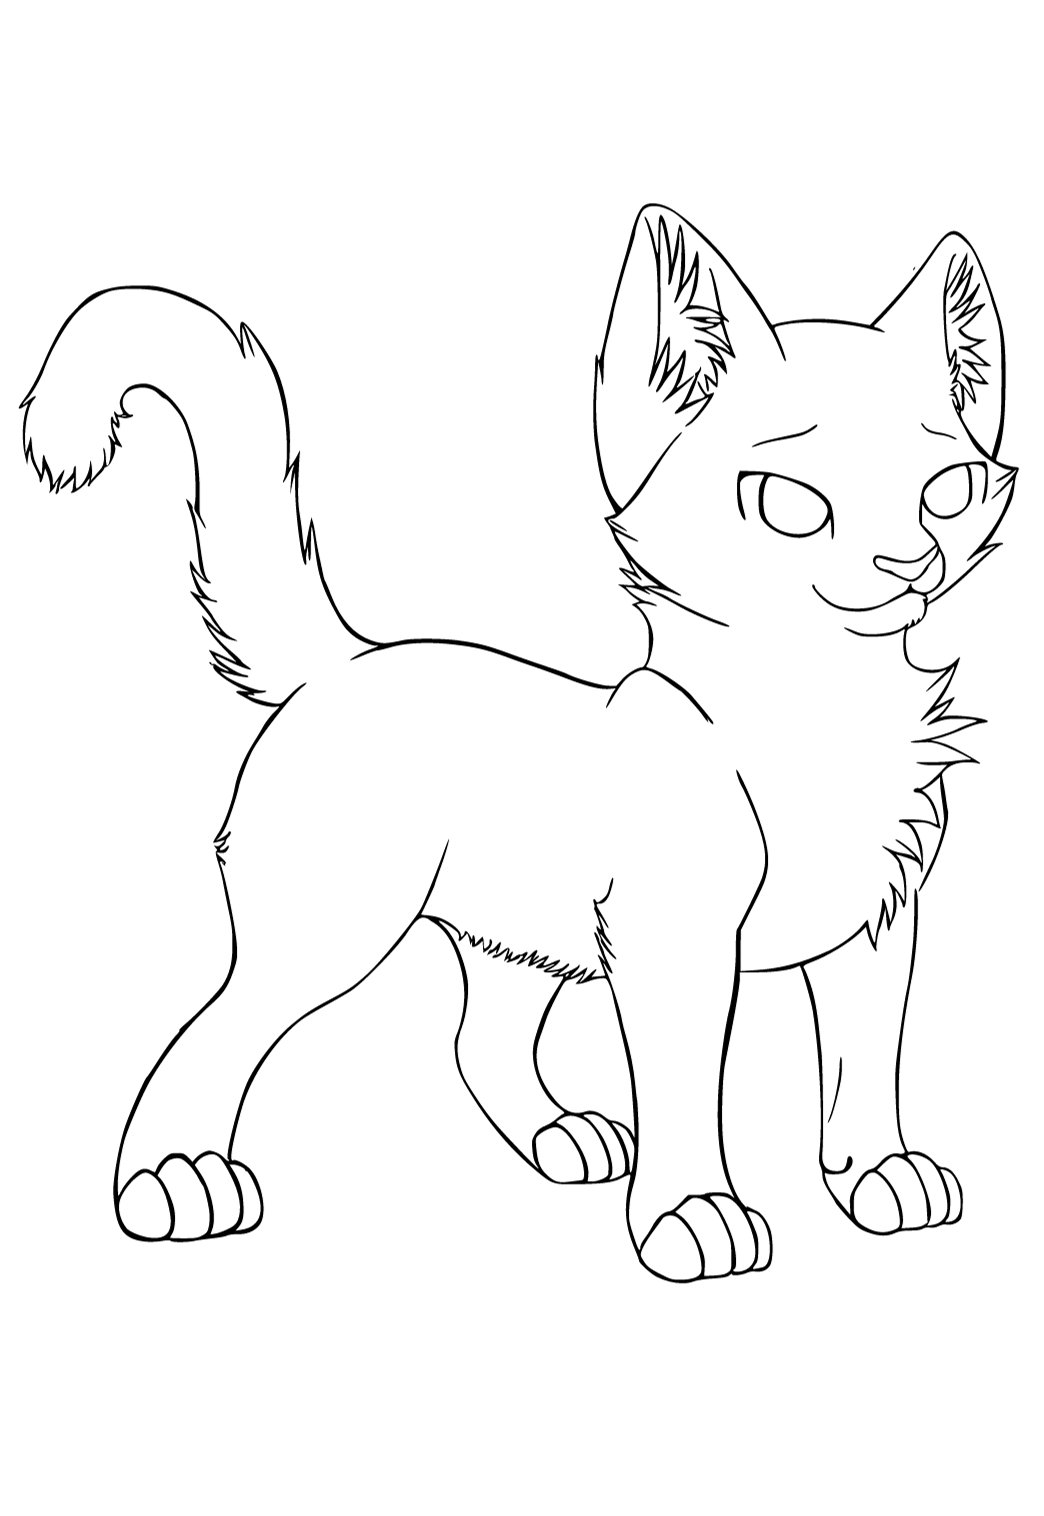 Free Printable Warrior Cats Easy Coloring Page for Adults and Kids ...